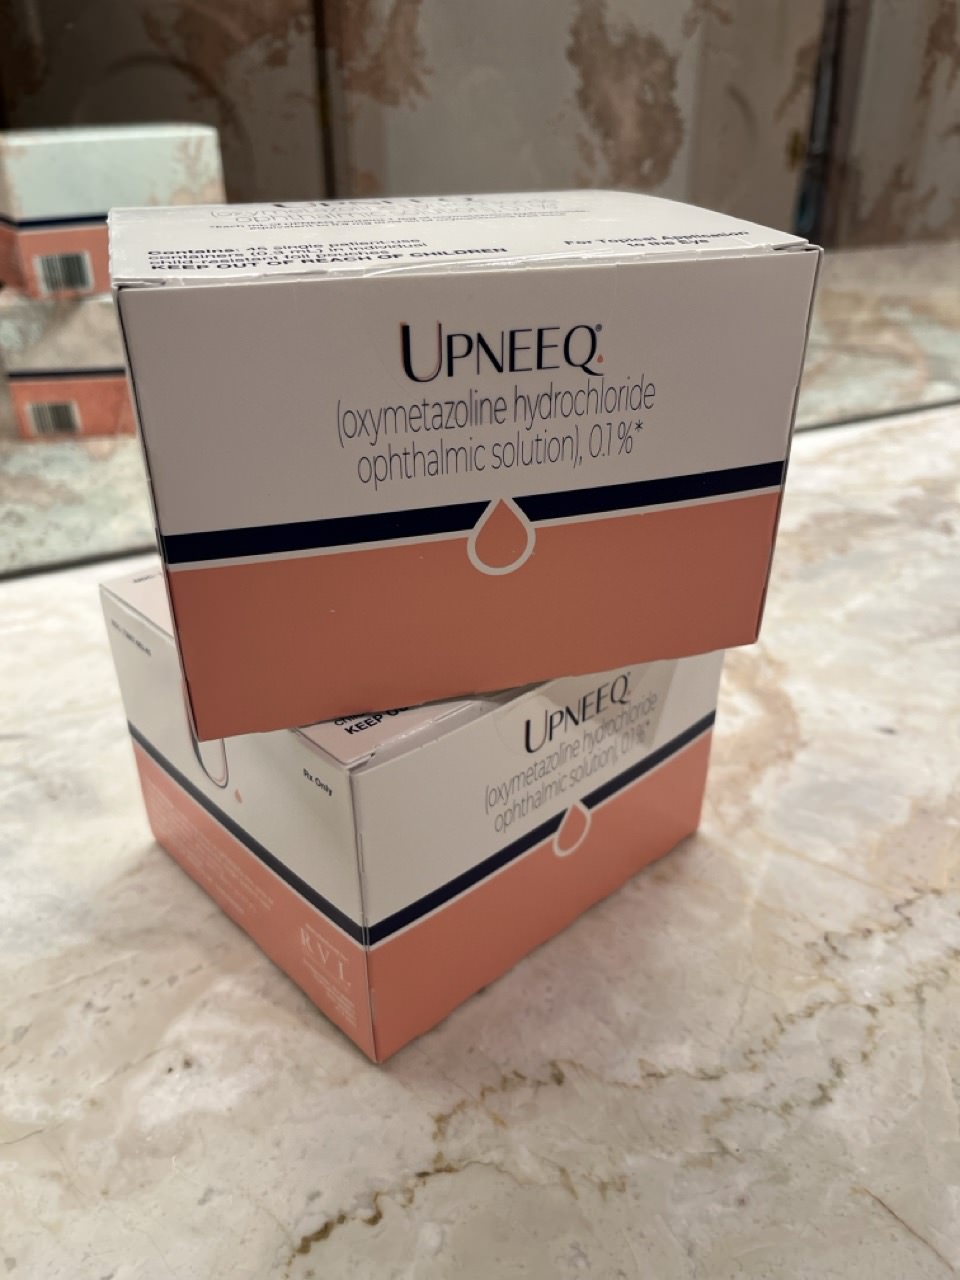 images of Upneeq boxes